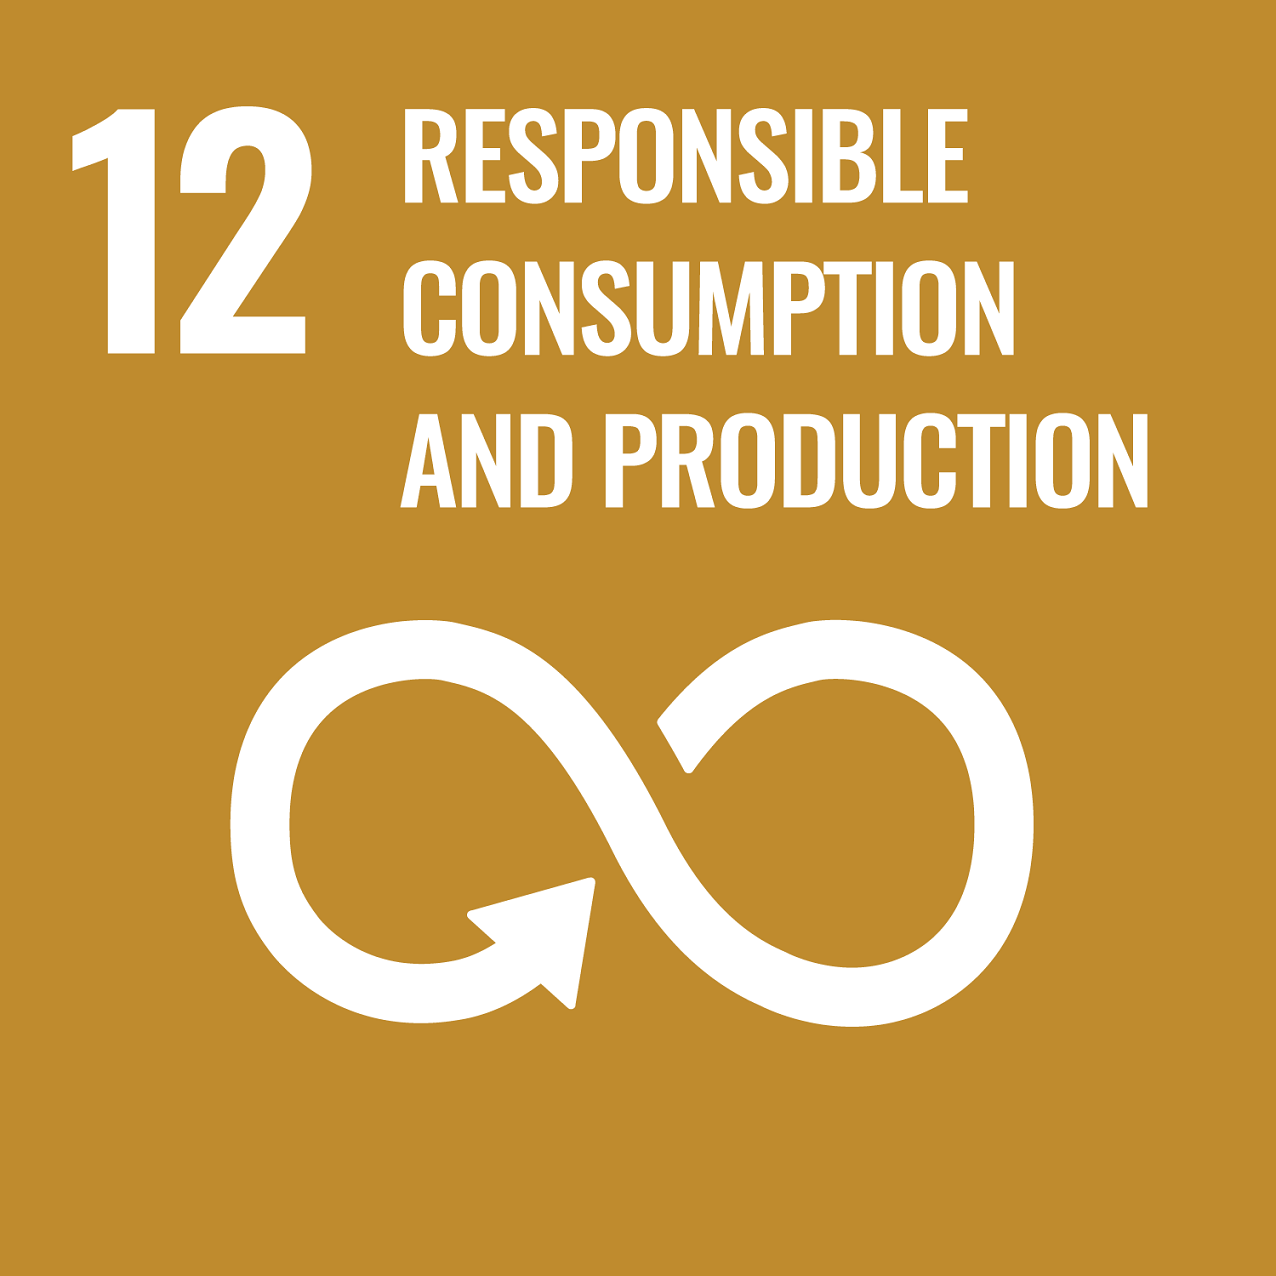 12 RESPONSIBE CONSUMPTION AND PRODUCTION